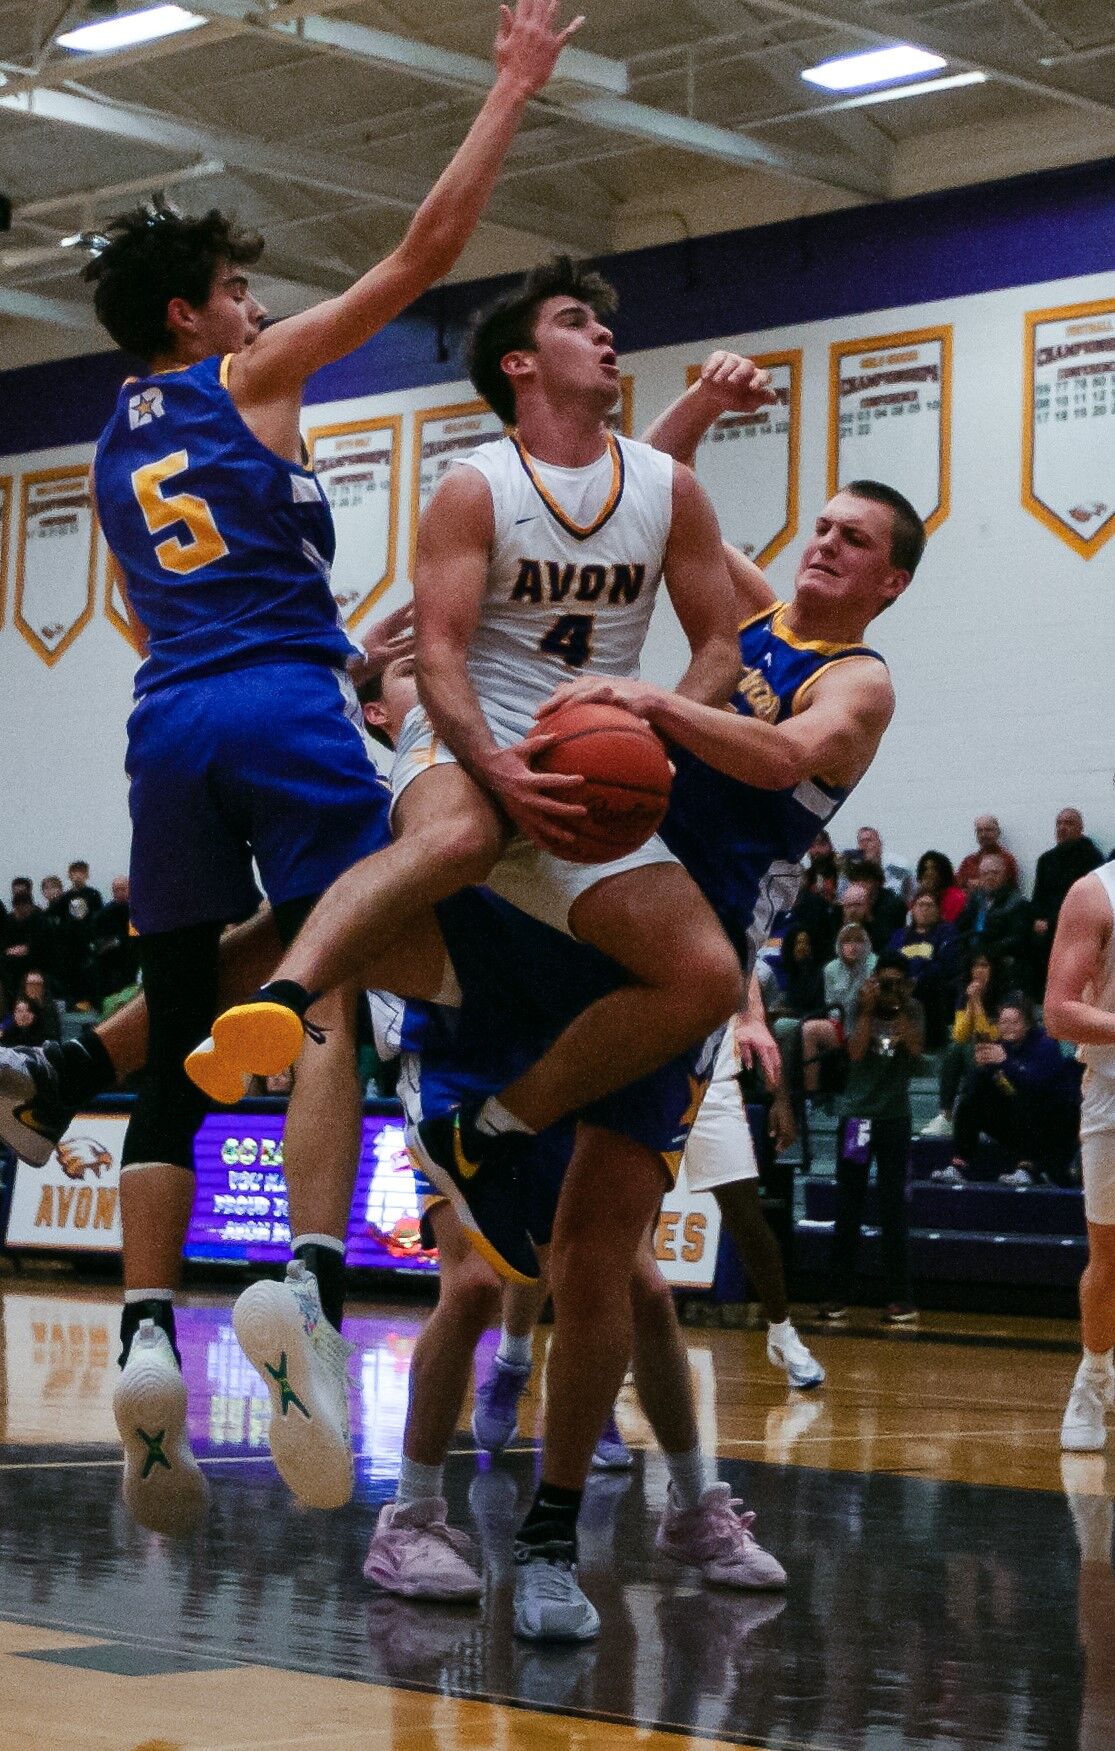 Lakewood Wins Nail-Biter 54-51 with Lucas Seguine’s Heroic 27-Point Display